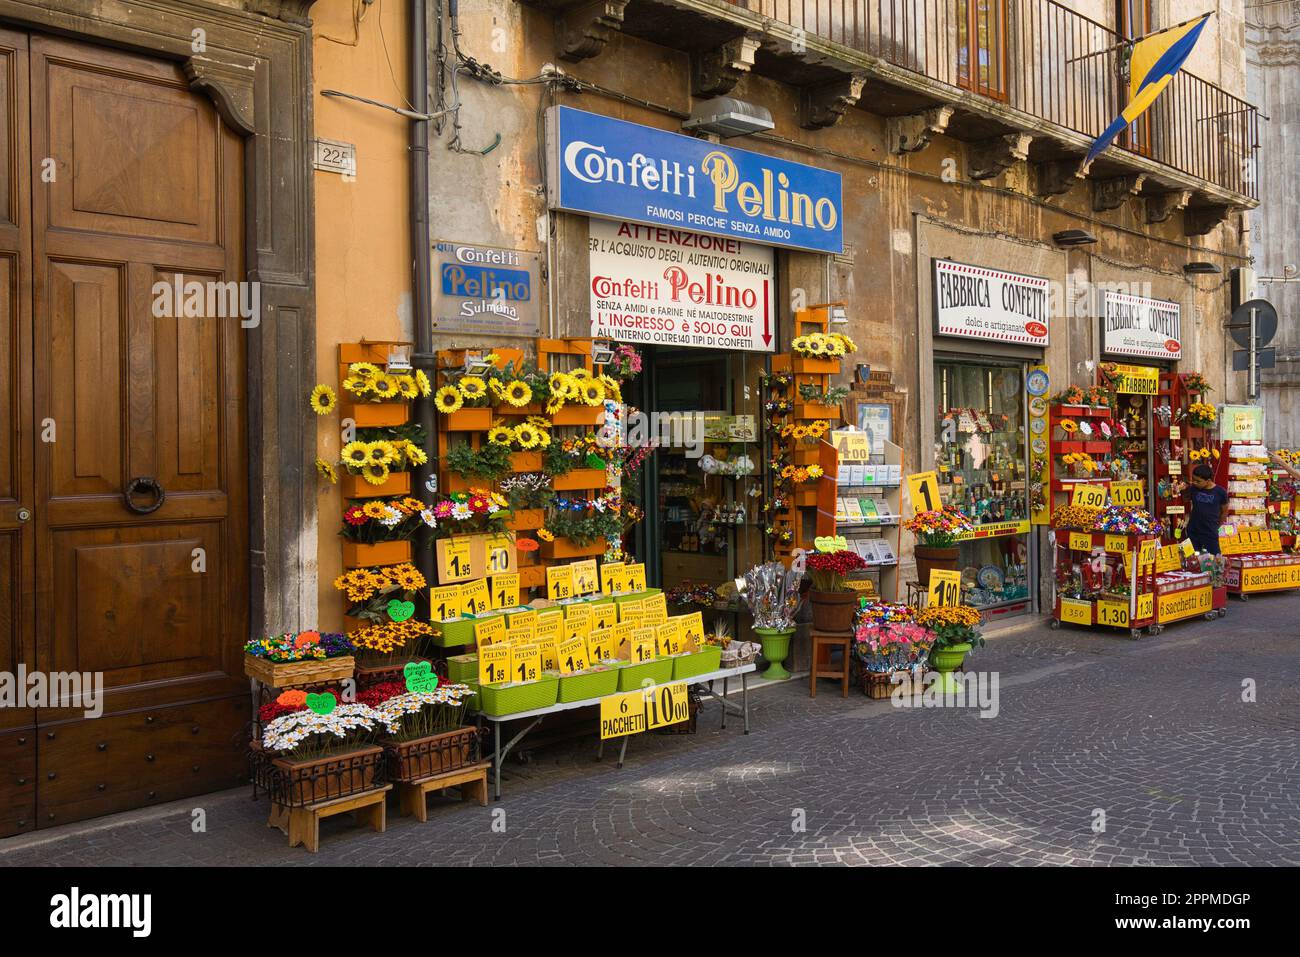 Sulmona, L`Aquila, Italy - 25 August 2022: A store selling Confetto di Sulmona, a typical sweet speciality of the city of Sulmona in Italy. Stock Photo